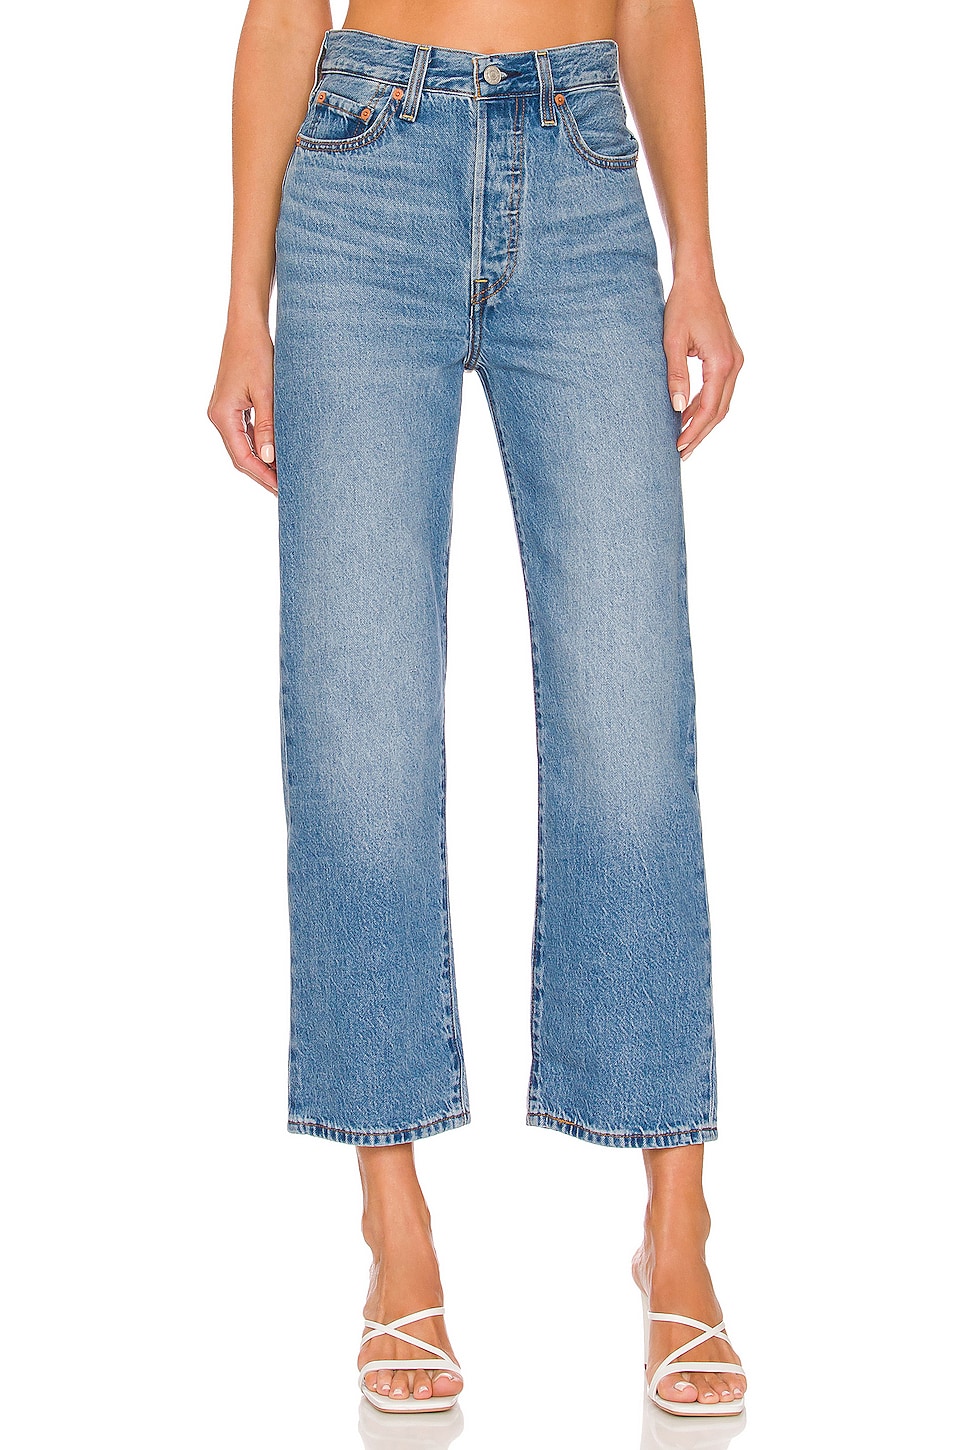 LEVI'S Ribcage Straight Ankle in In the Middle | REVOLVE